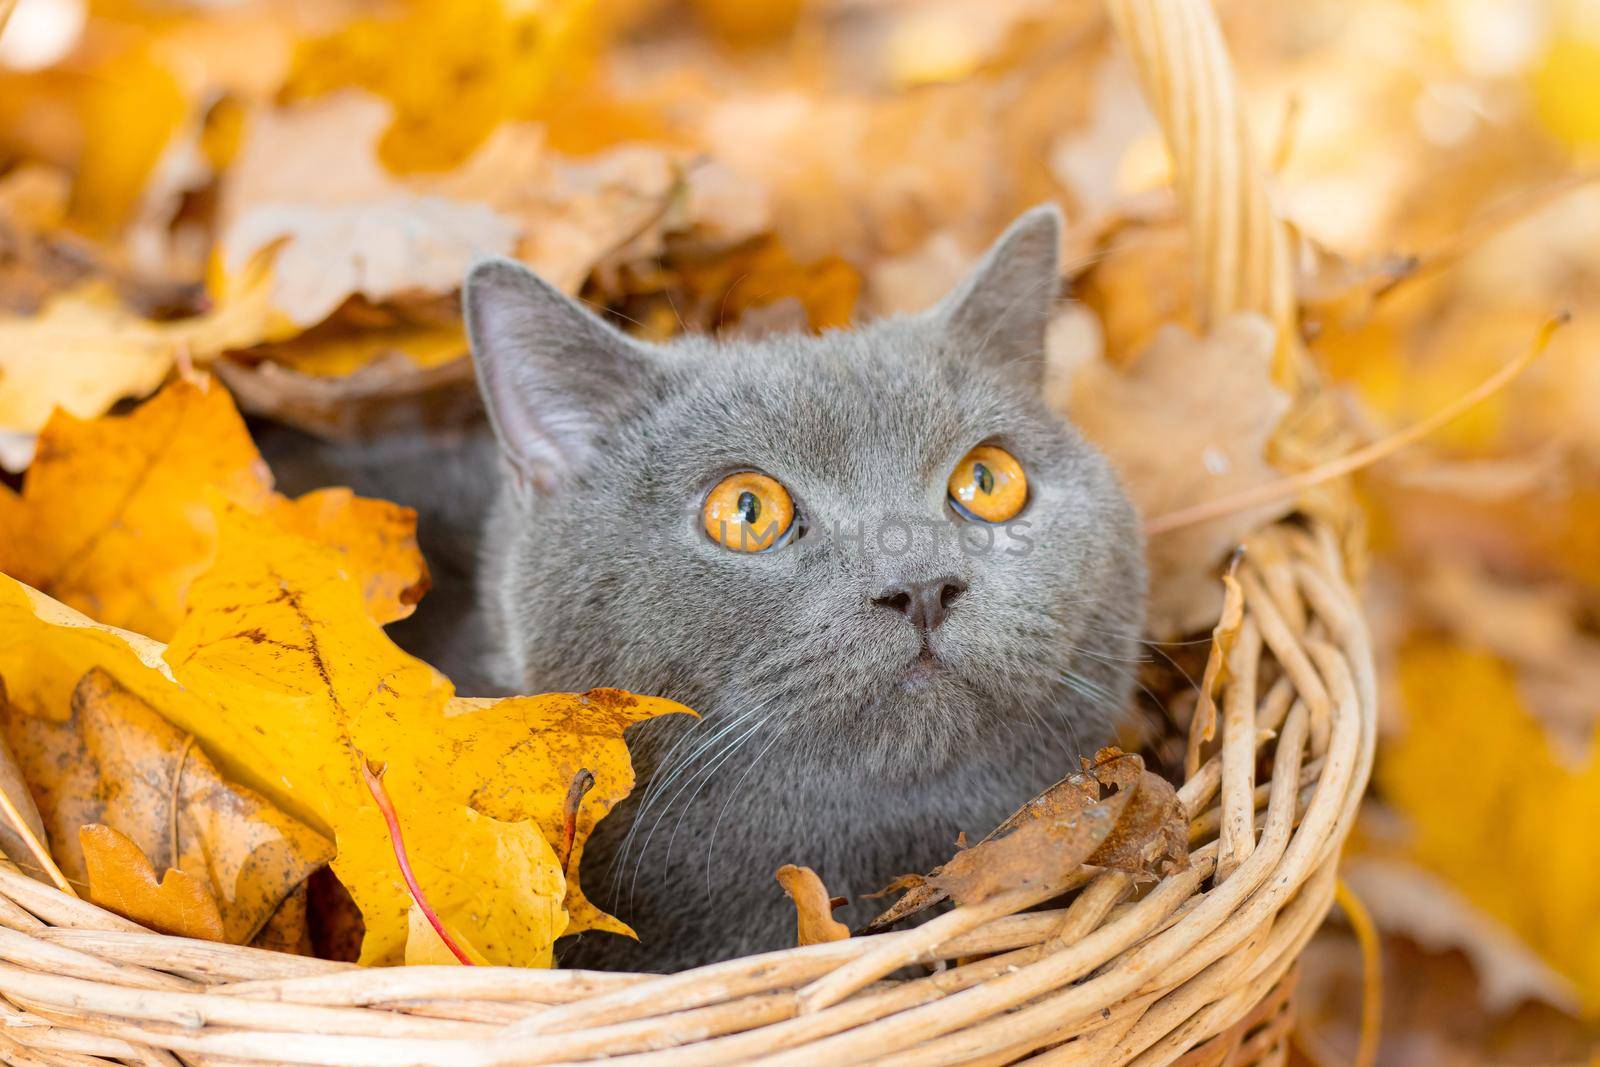 Grey cat in the basket. British cat. Cat sitting in a basket and autumn leaves . Young cat. Autumn vacation. Walking a pet. Article about cats and autumn. Yellow fallen leaves. Photos for printed products